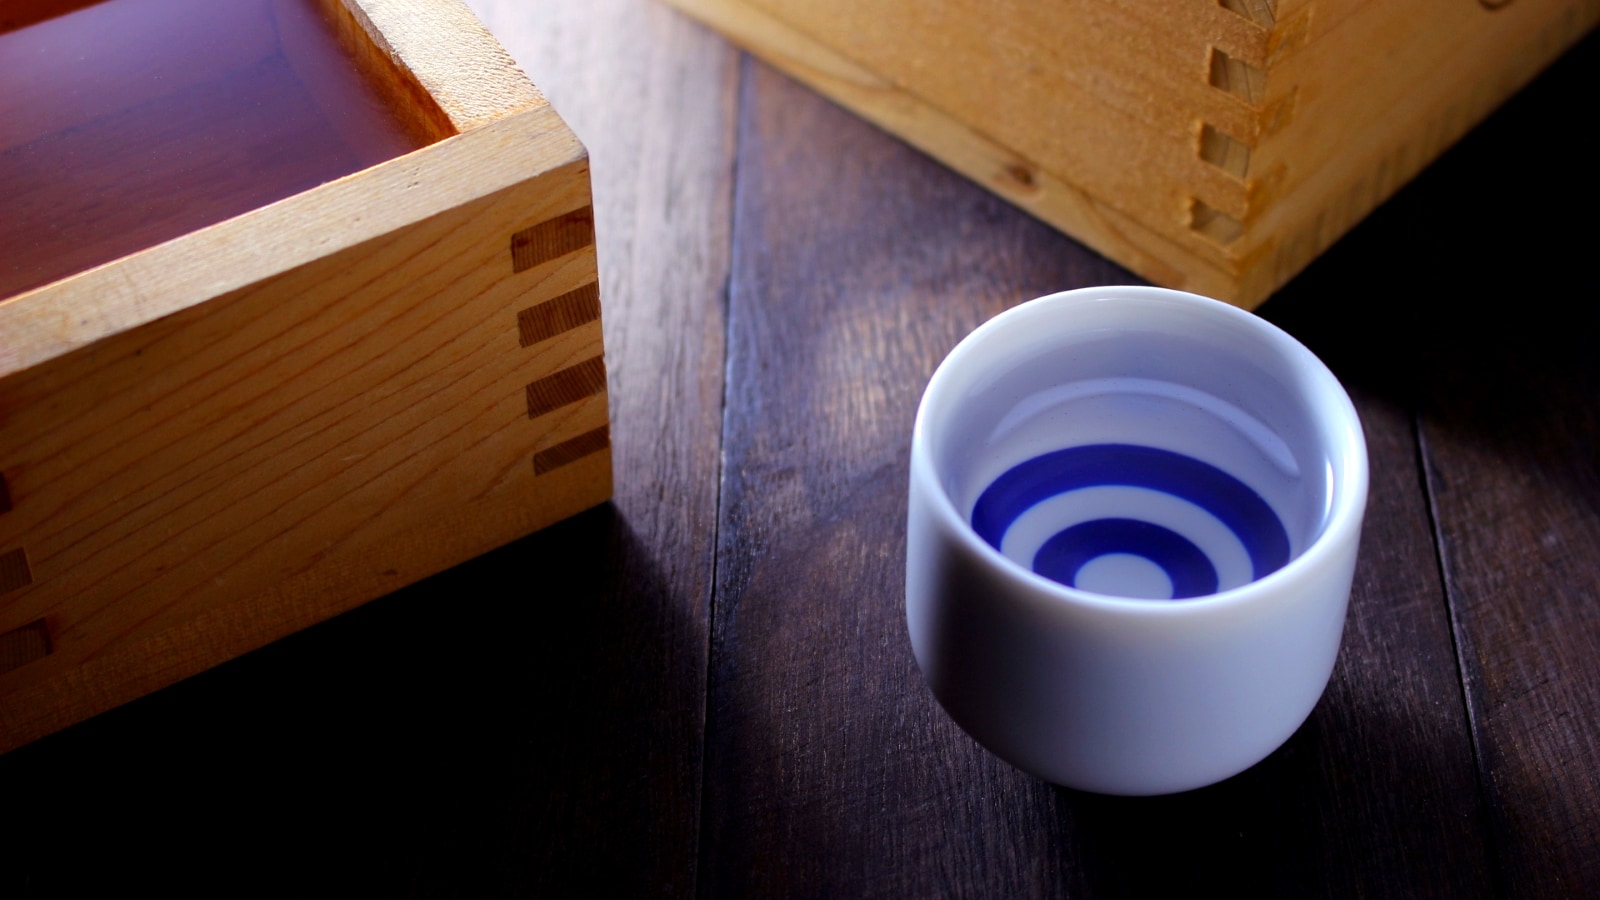 Local famous sake is prepared at the welcome lounge.